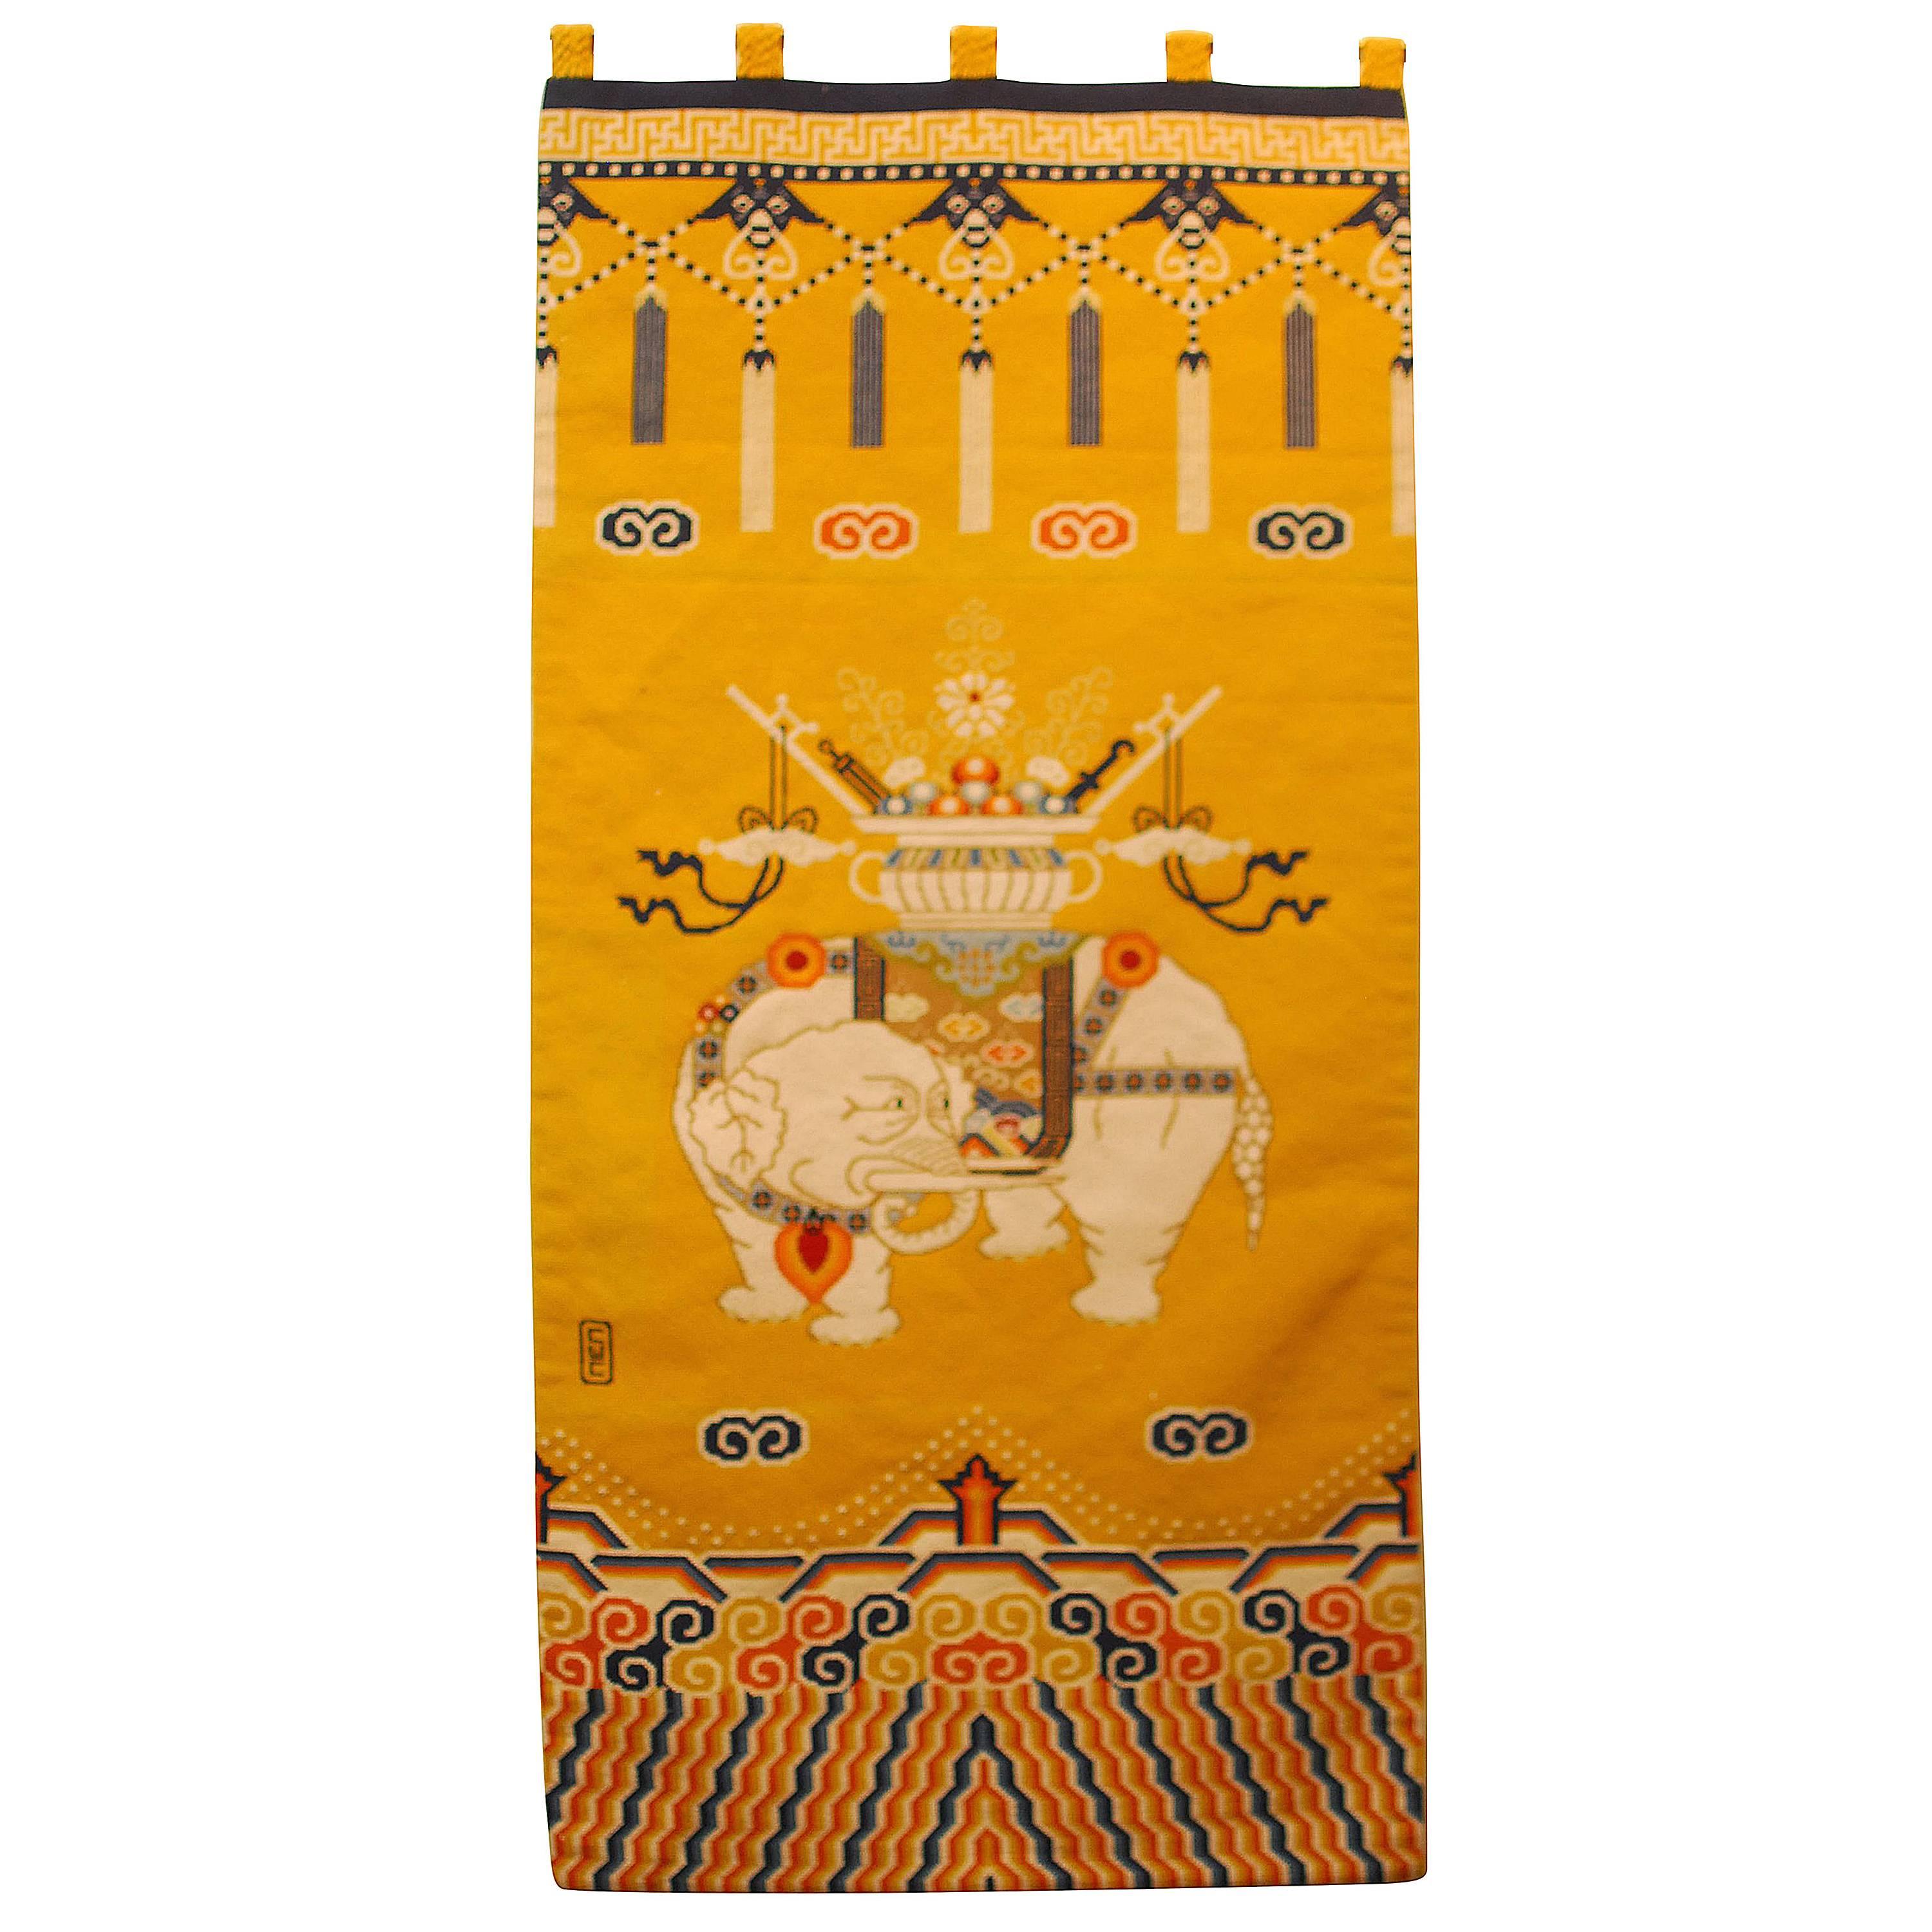 Colorful Tibetan Khaden style needlepoint rug featuring a white Asian elephant and decorated with geometric patterns of Greek keys and cloud motifs. The top depicts long tassels hanging from beast heads. The carpet has a bright yellow background and